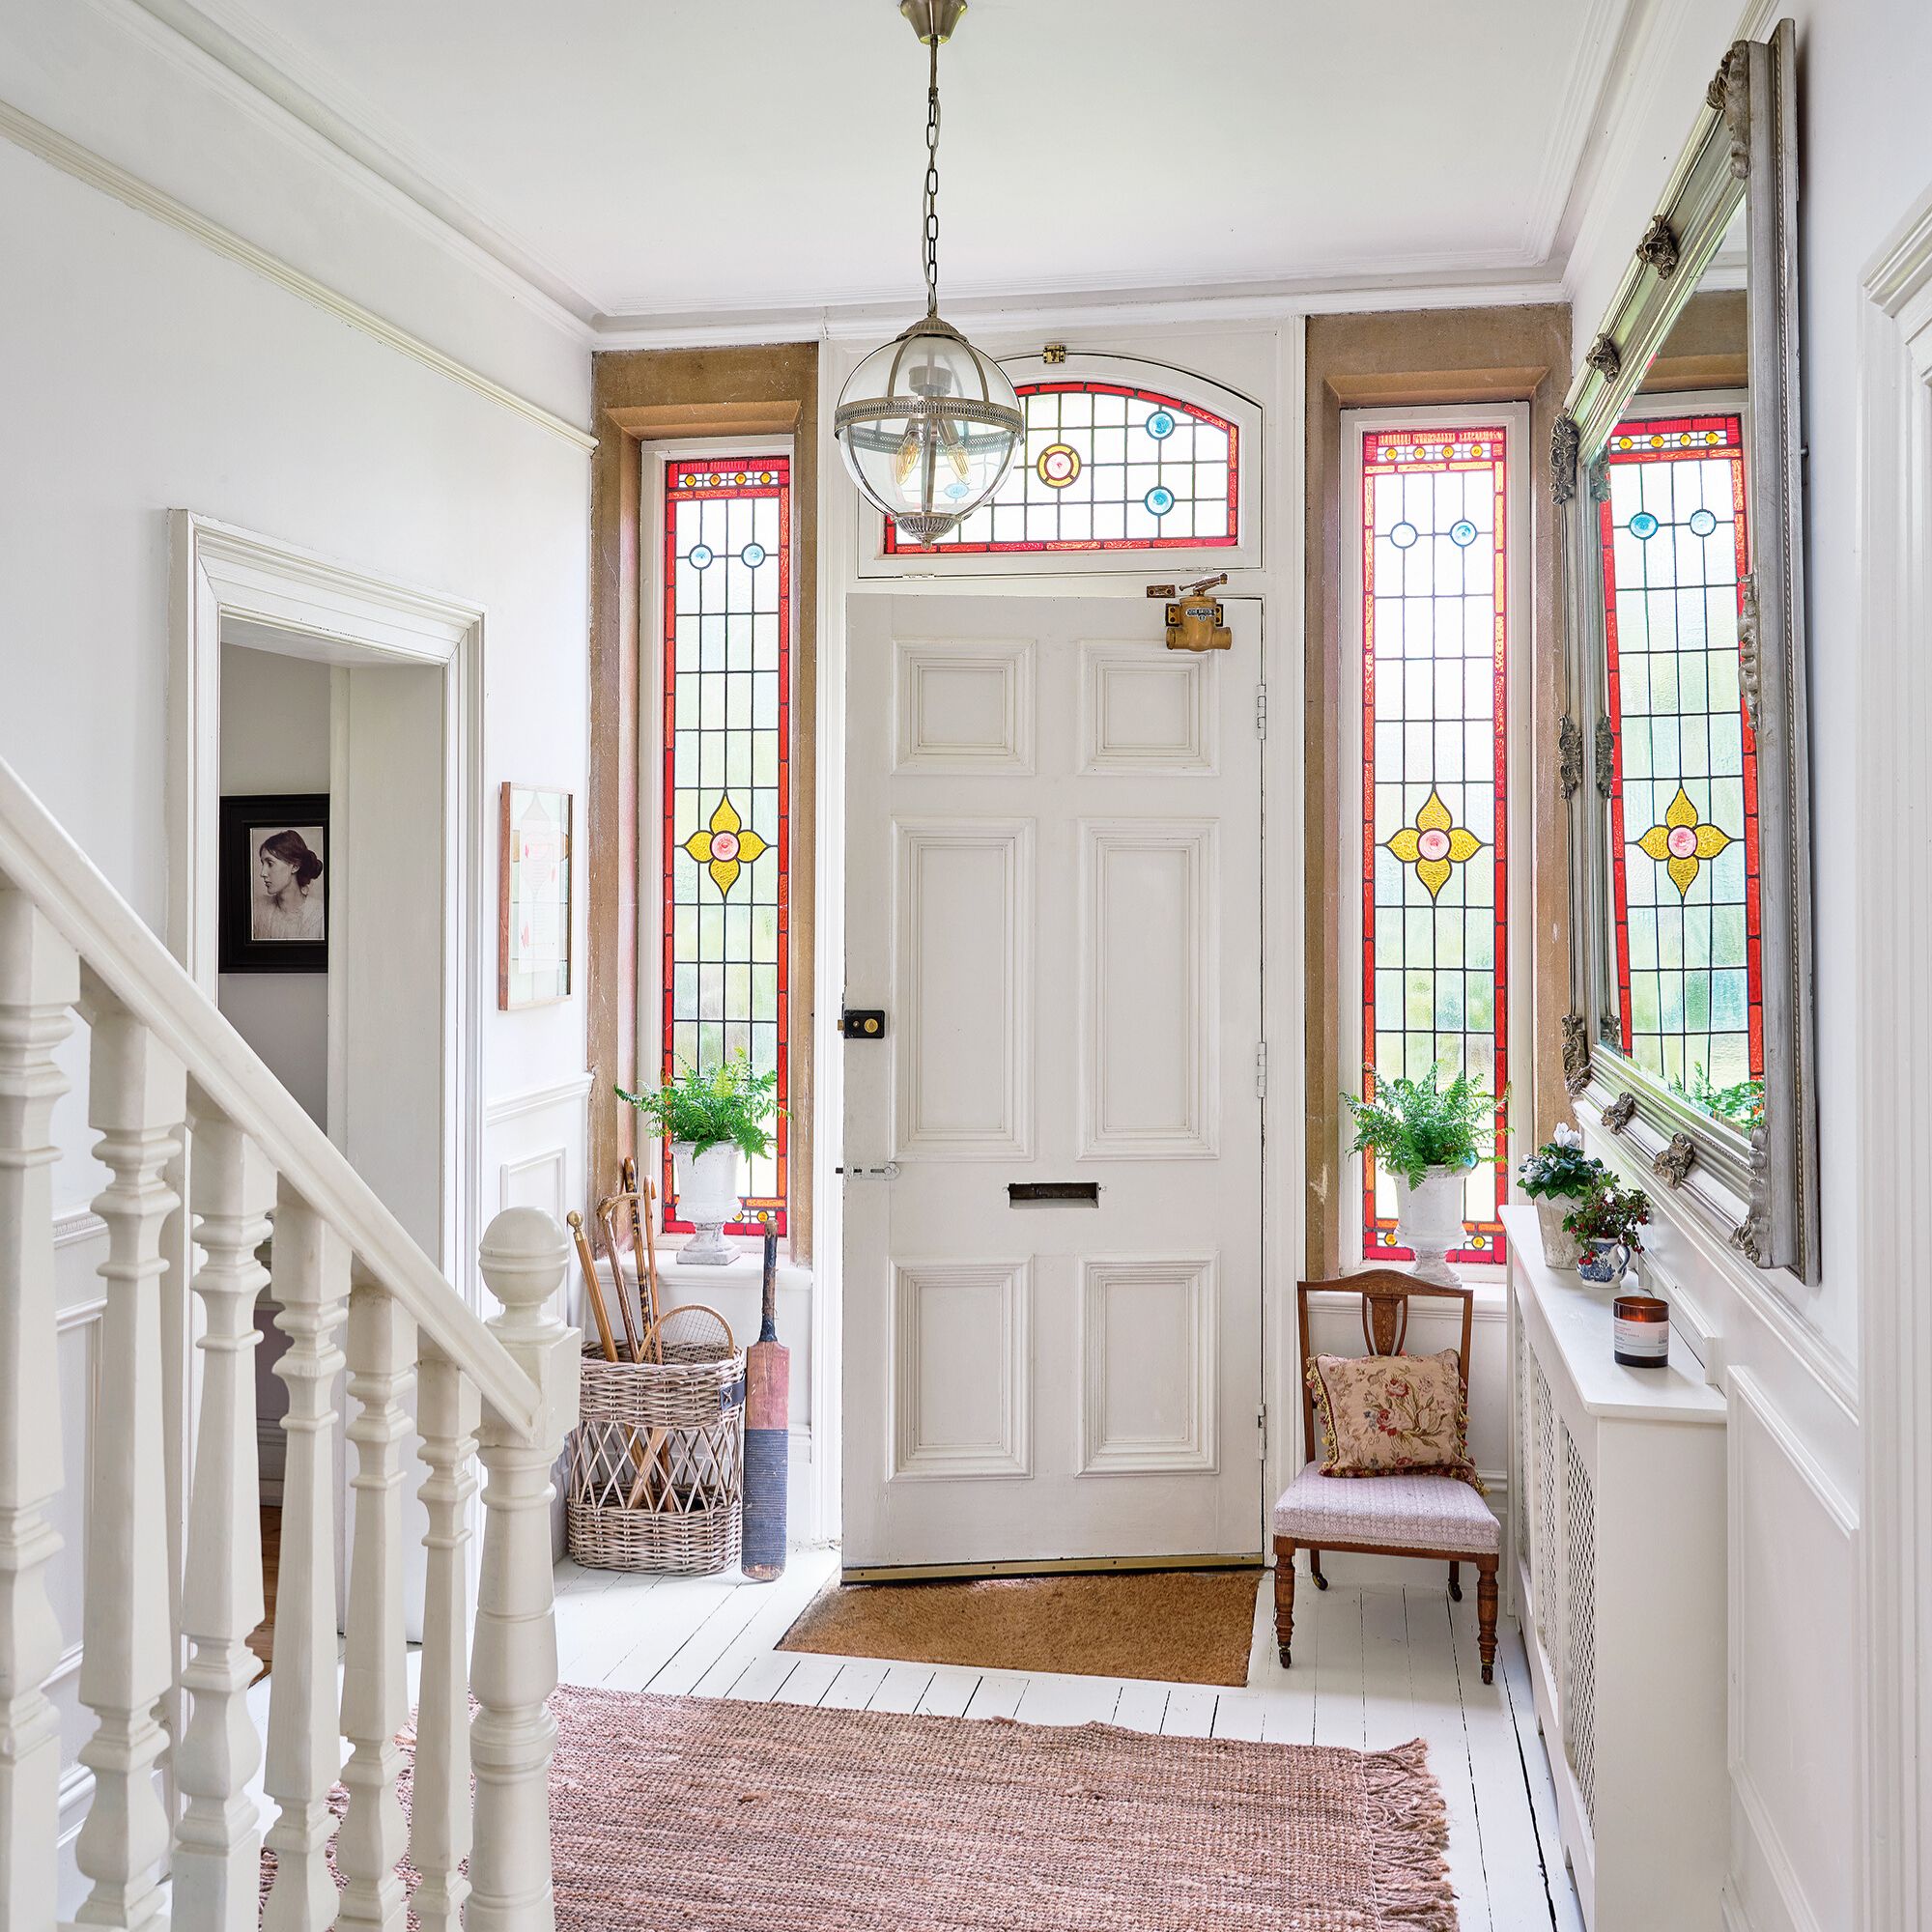 stained glass windows in hallway with white walls and door